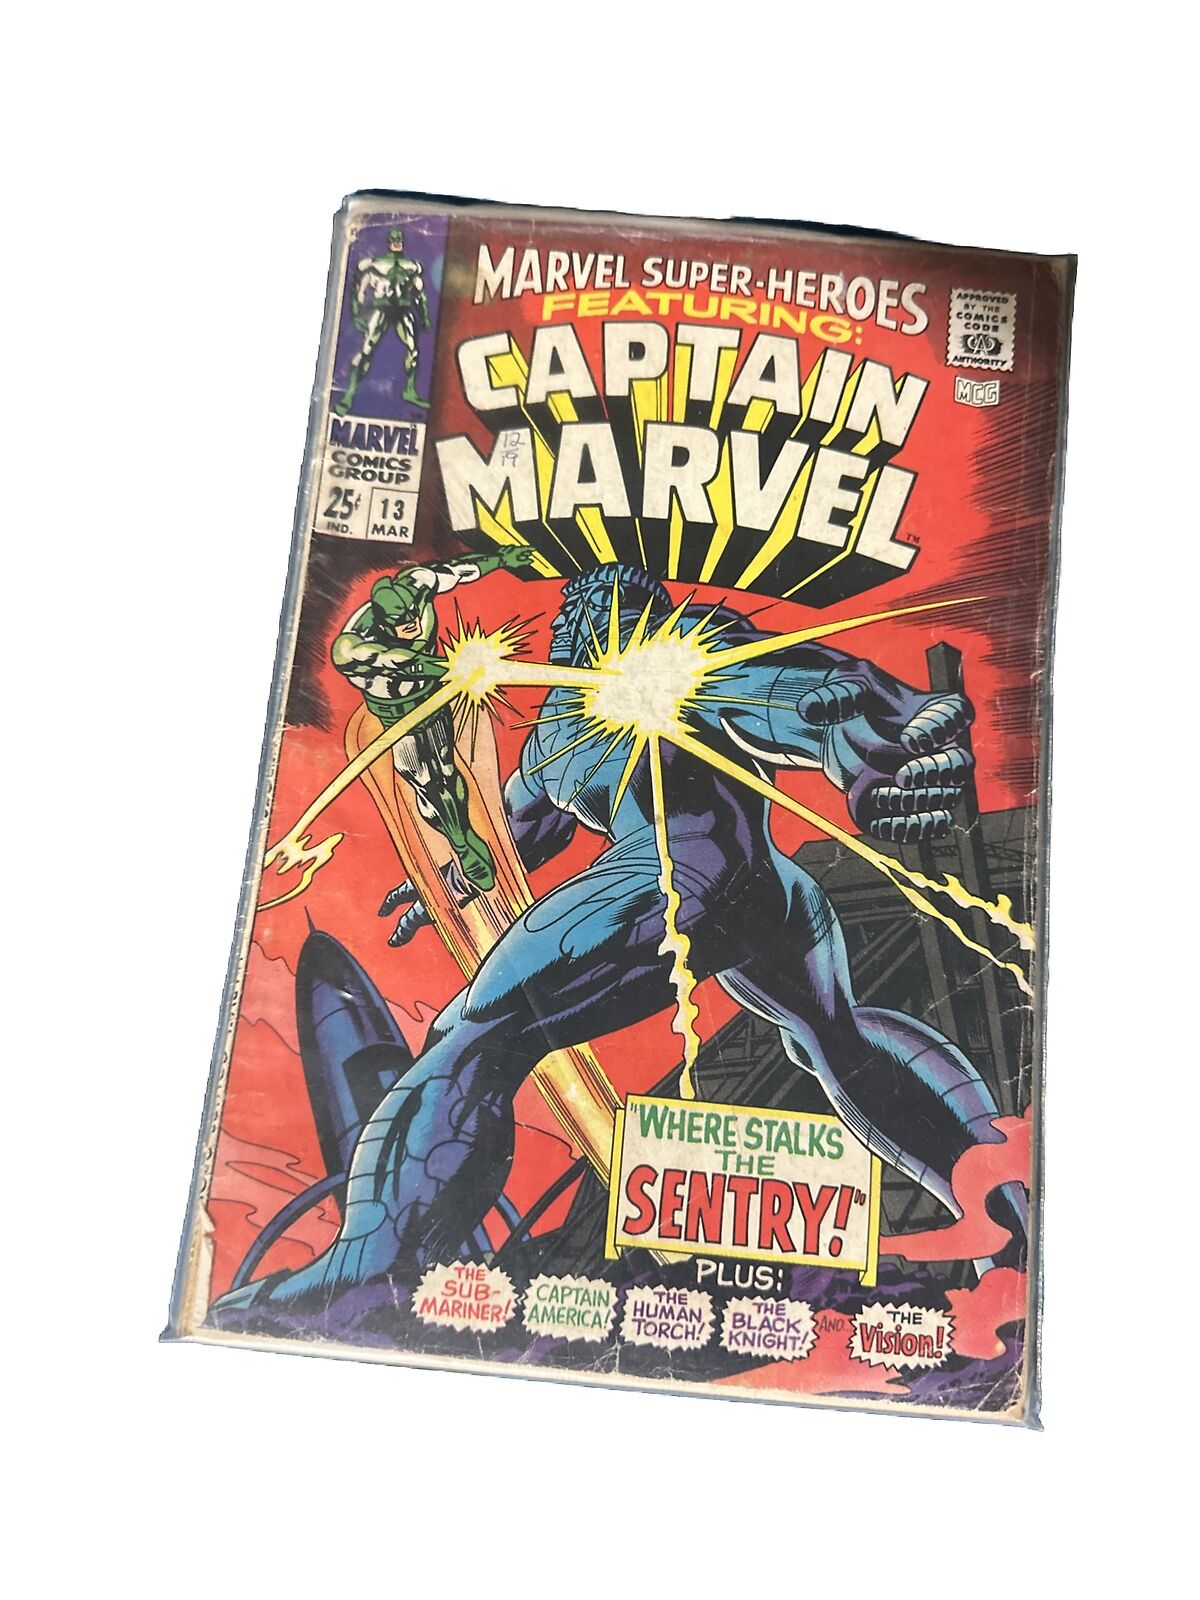 Marvel Super-heroes featuring Captain Marvel